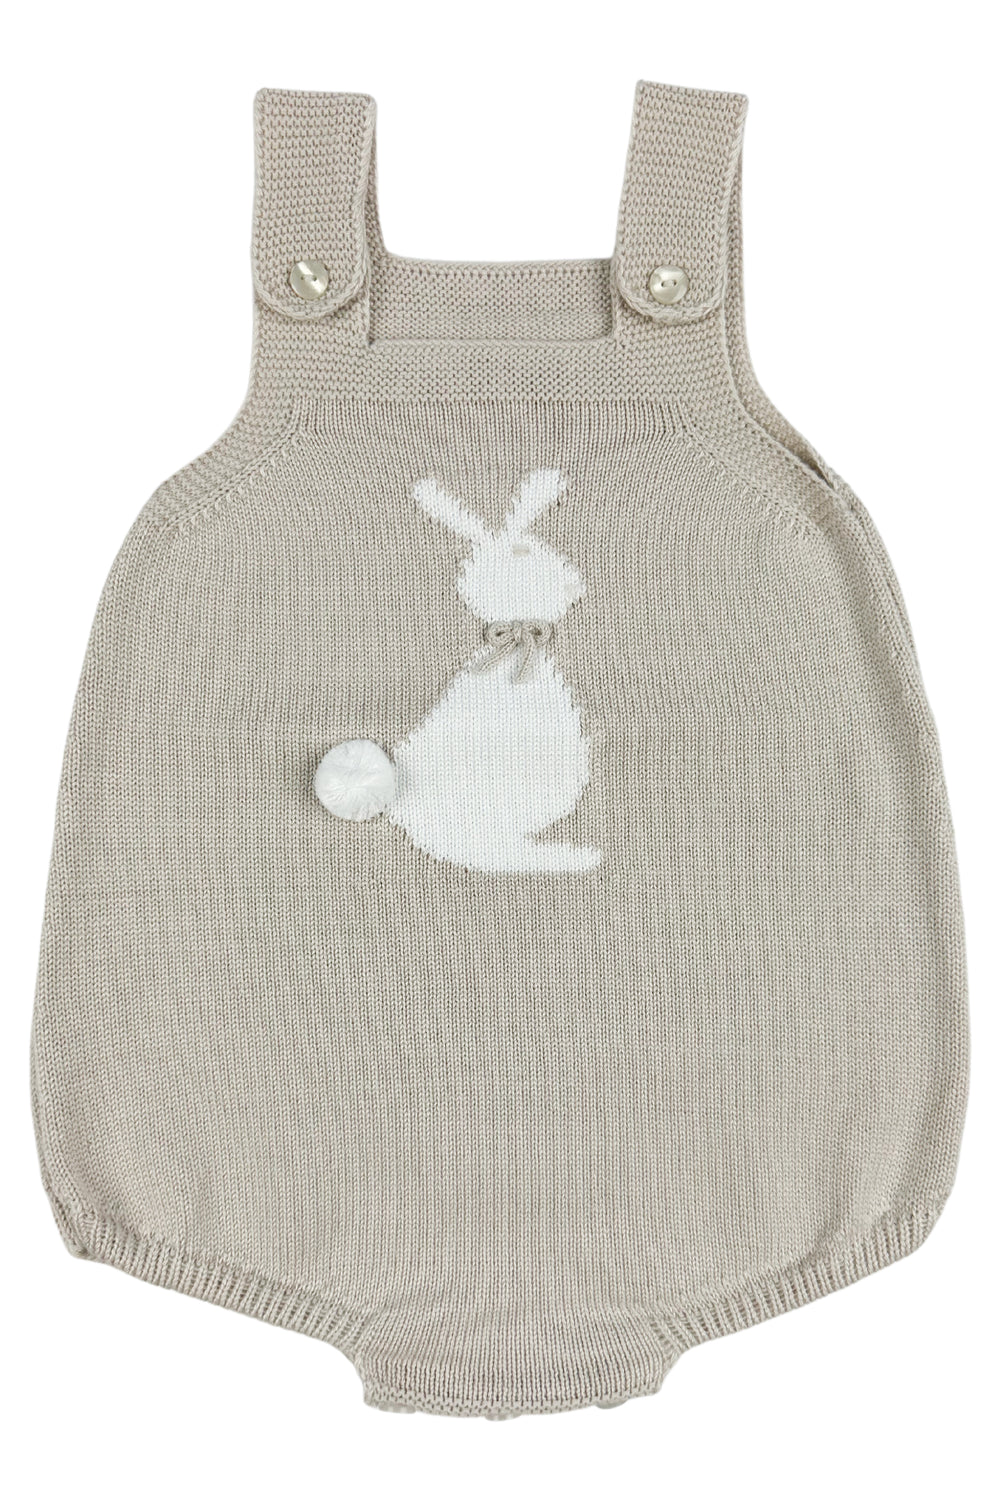 Granlei "Roux" Stone Knit Bunny Dungaree Romper | iphoneandroidapplications